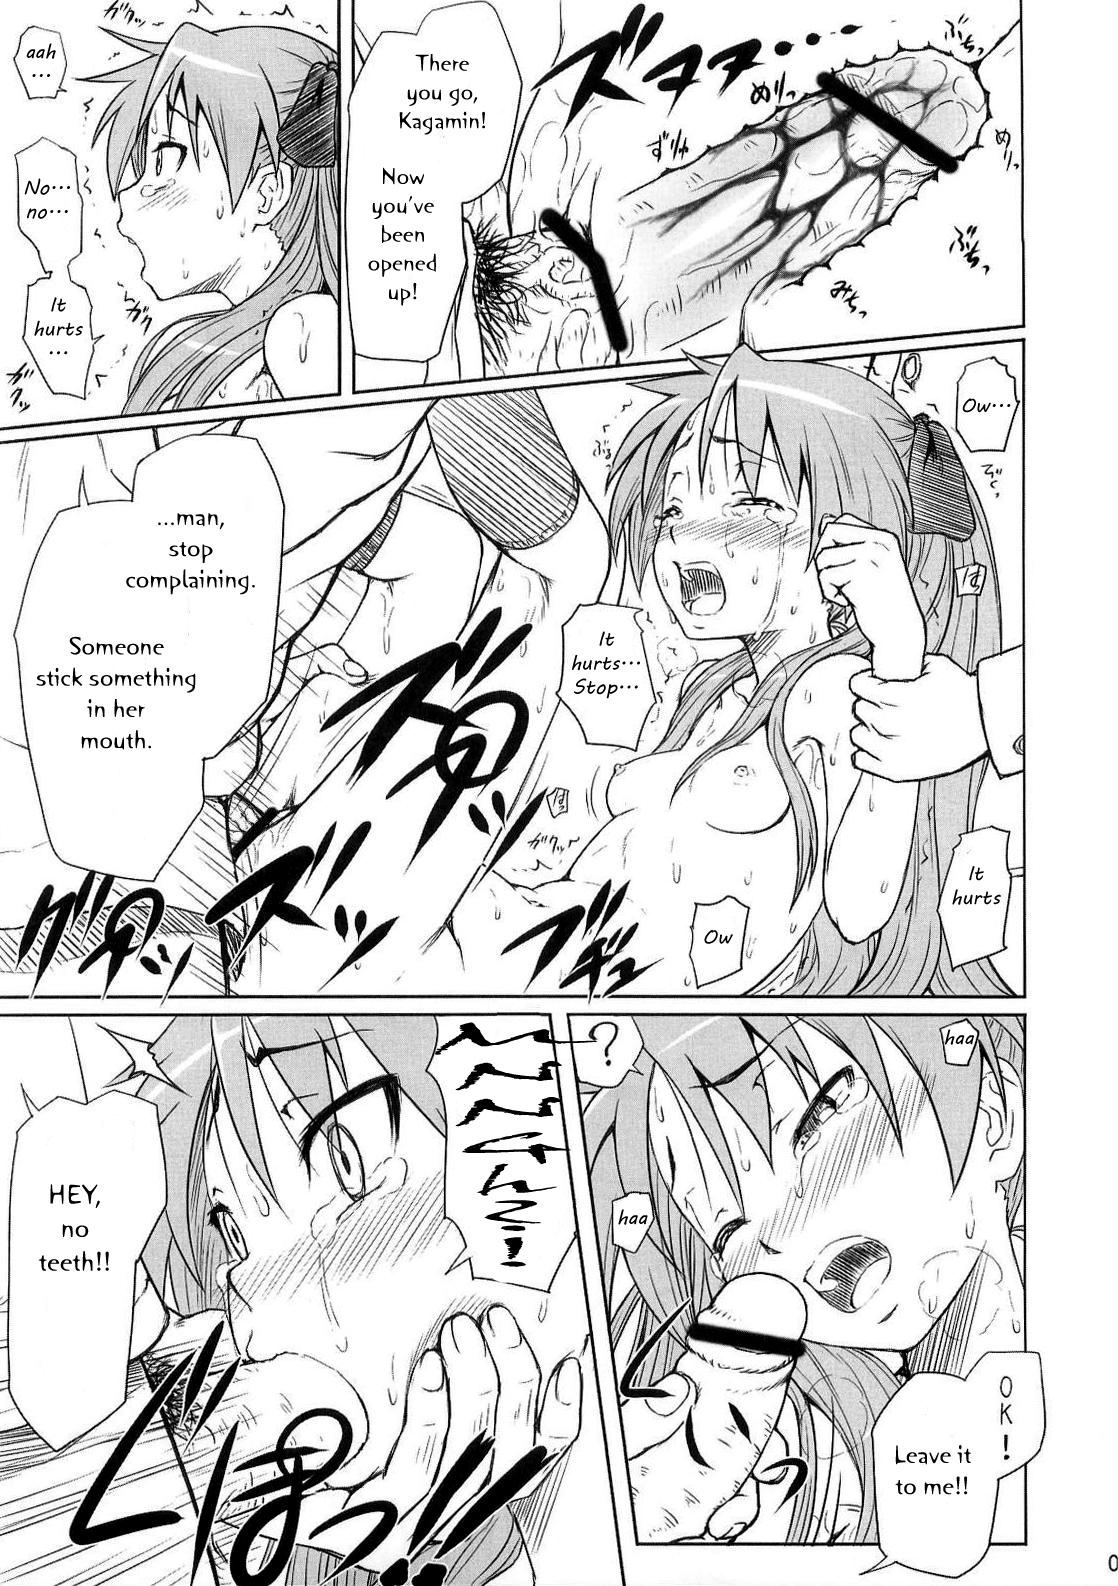 Softcore Kagamin wa Ore no Yome | Kagamin Is My Woman - Lucky star Freak - Page 8